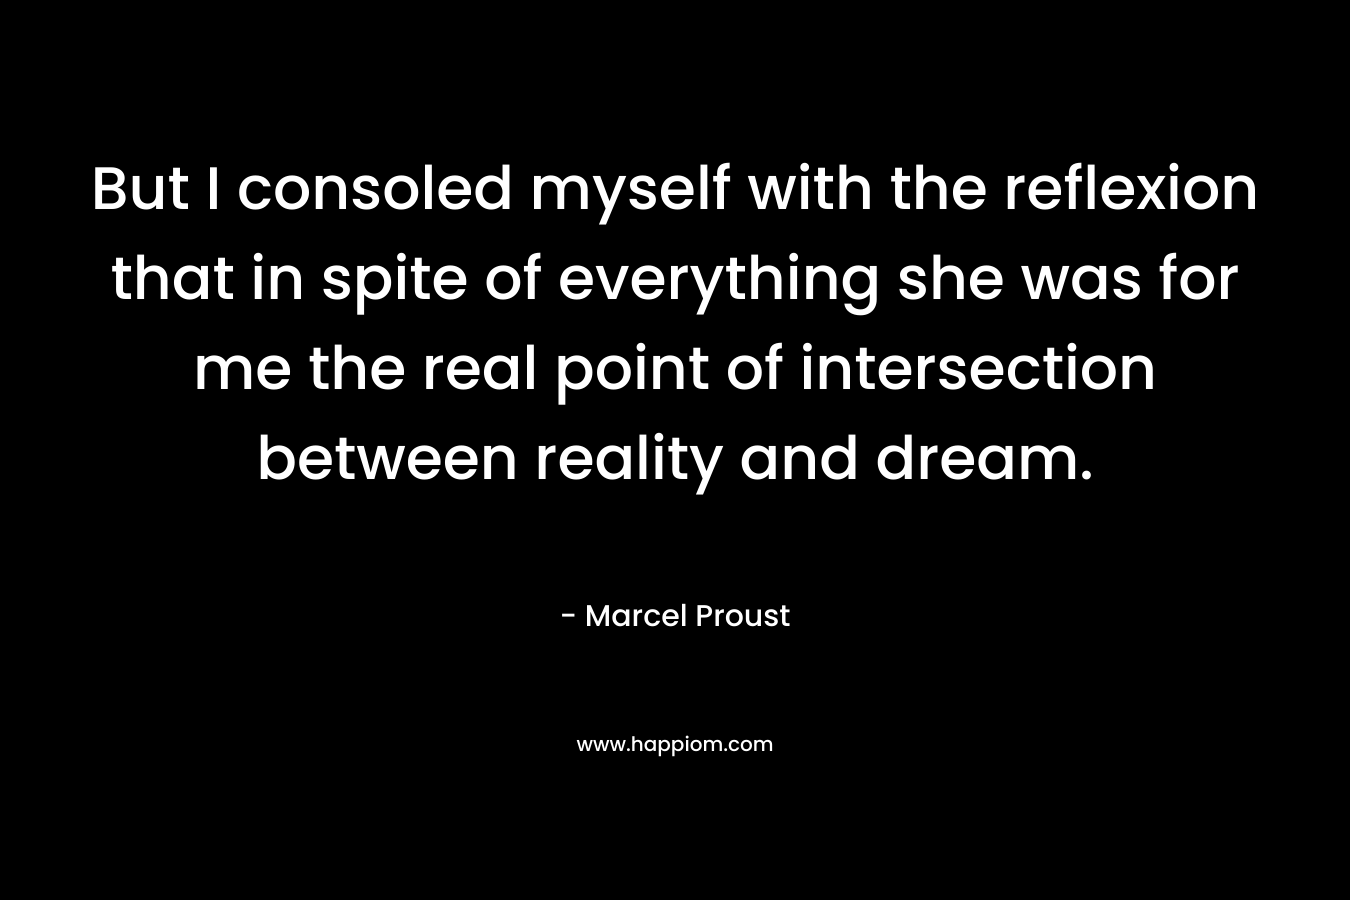 But I consoled myself with the reflexion that in spite of everything she was for me the real point of intersection between reality and dream. – Marcel Proust